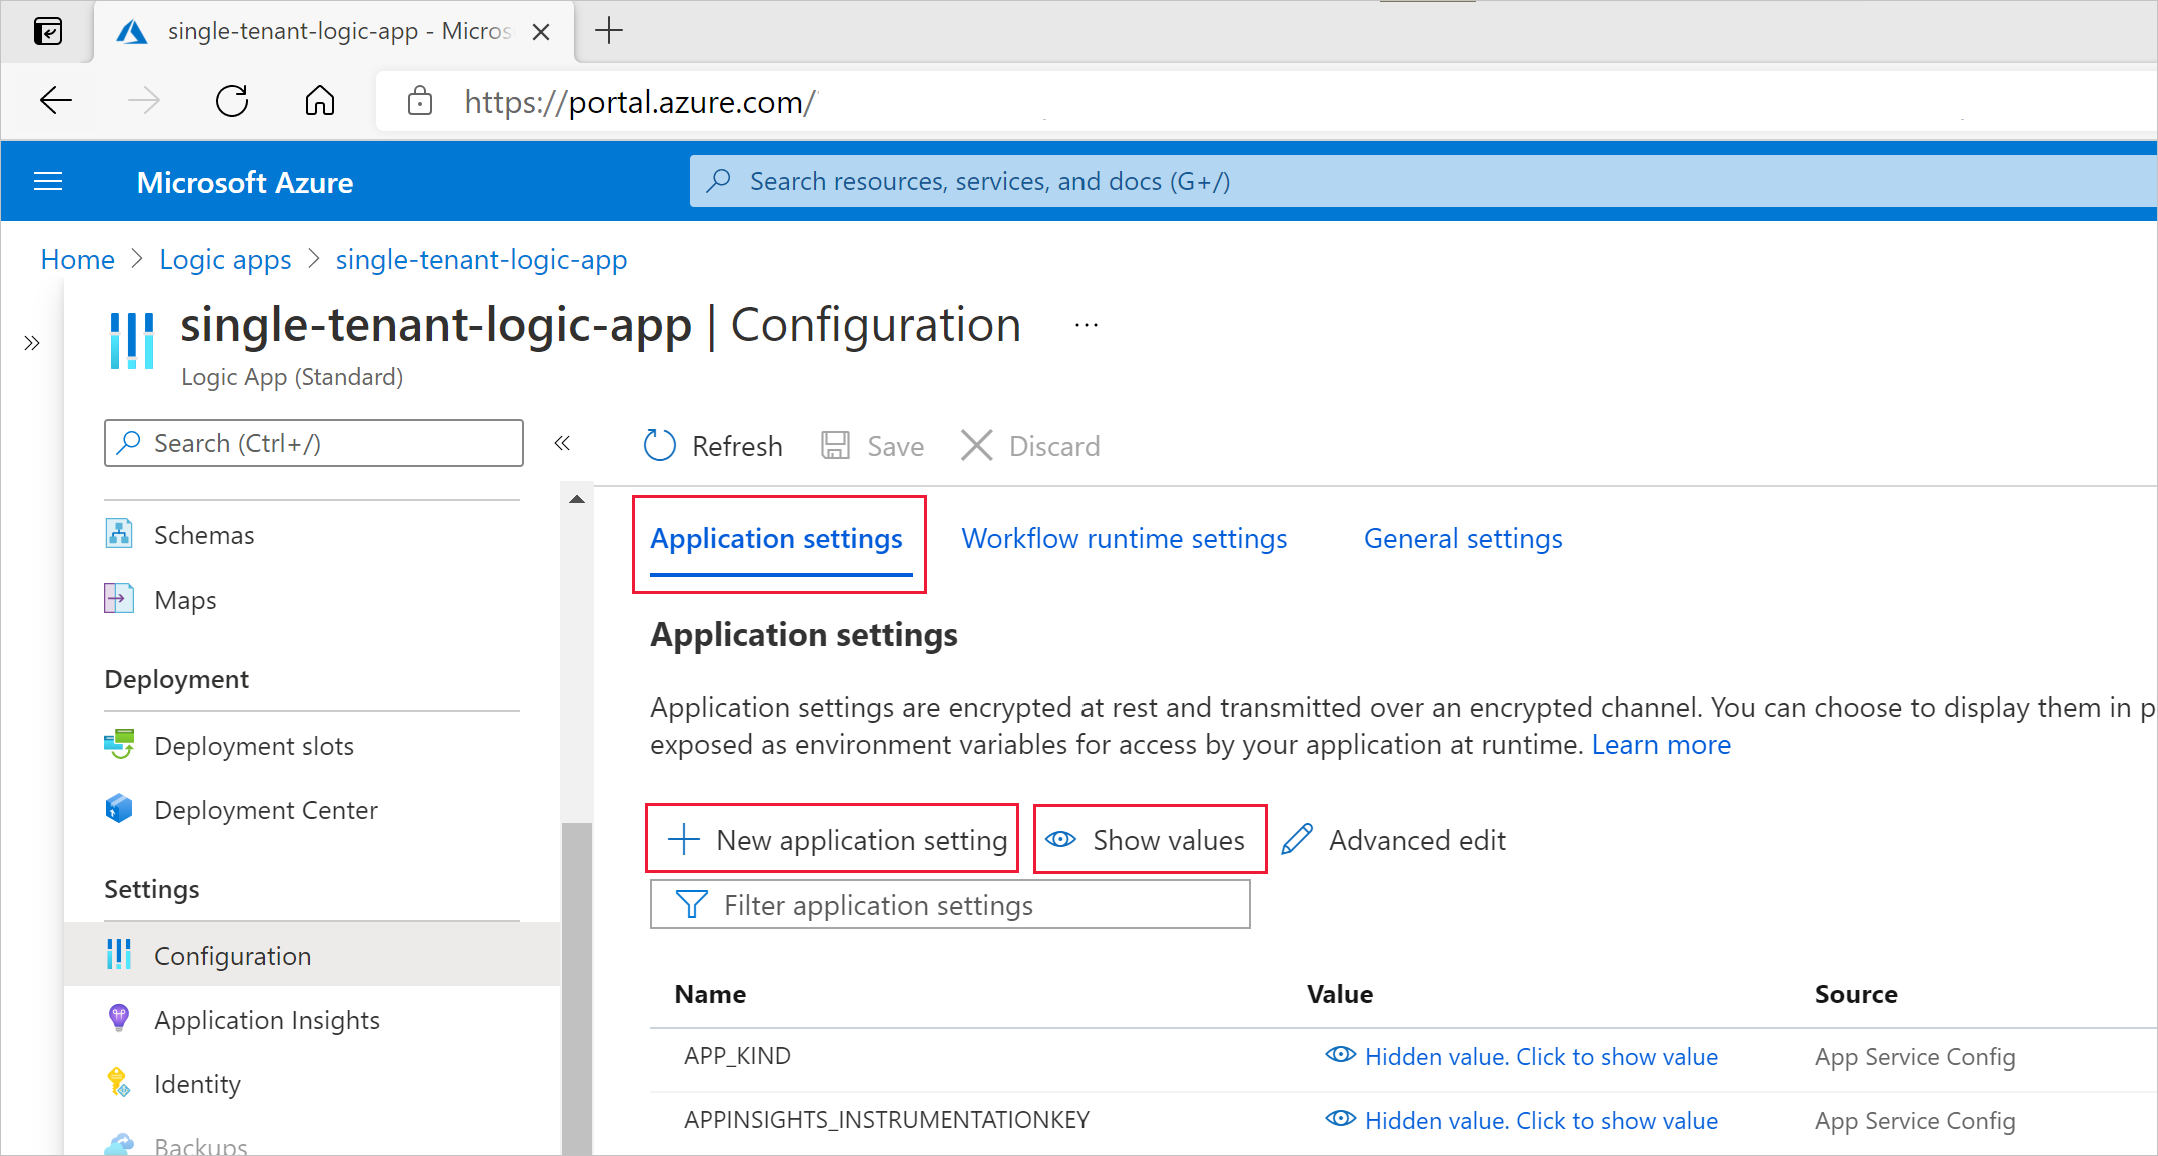 Screenshot showing the Azure portal and the configuration pane with the app settings and values for a single-tenant based logic app.